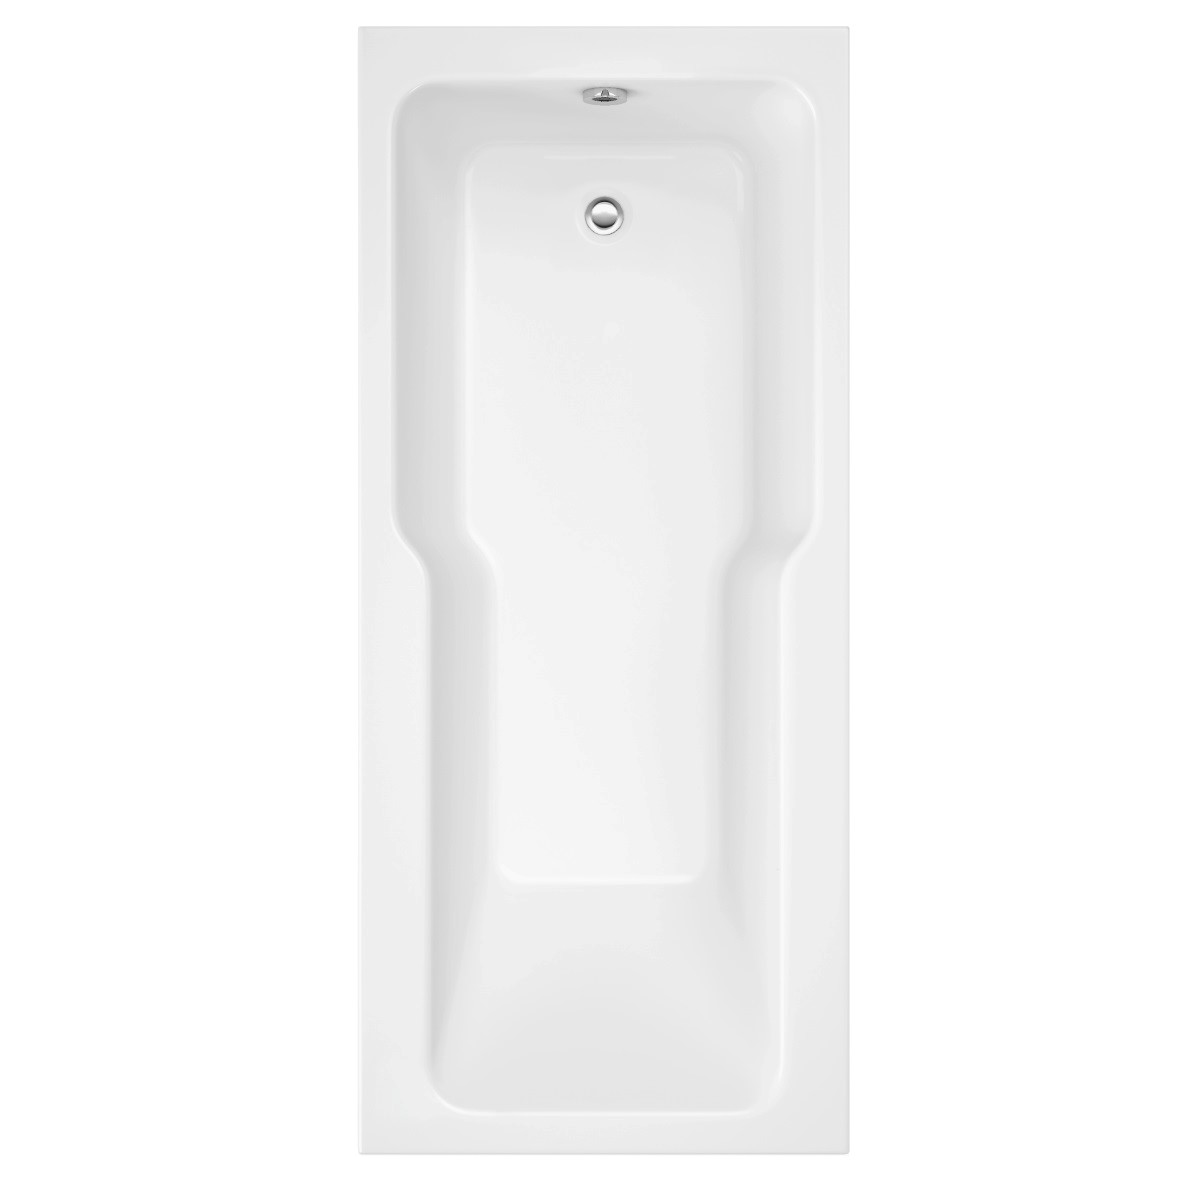 Evolve Single Ended Shower Bath with Panel & Screen 1700 x 750mm